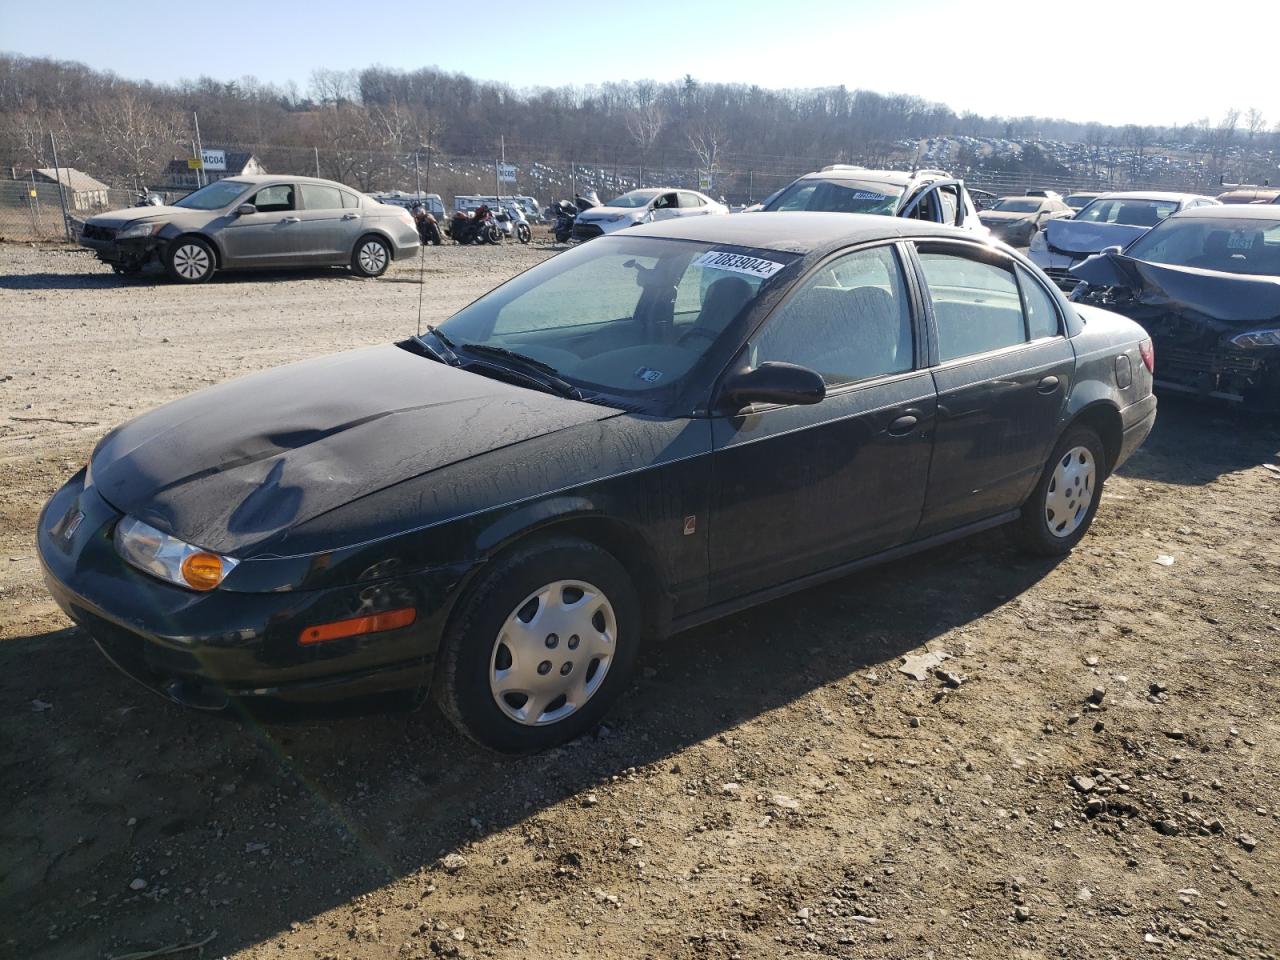 2001 Saturn SL1 for sale at Copart Chambersburg, PA Lot #70839*** |  SalvageReseller.com